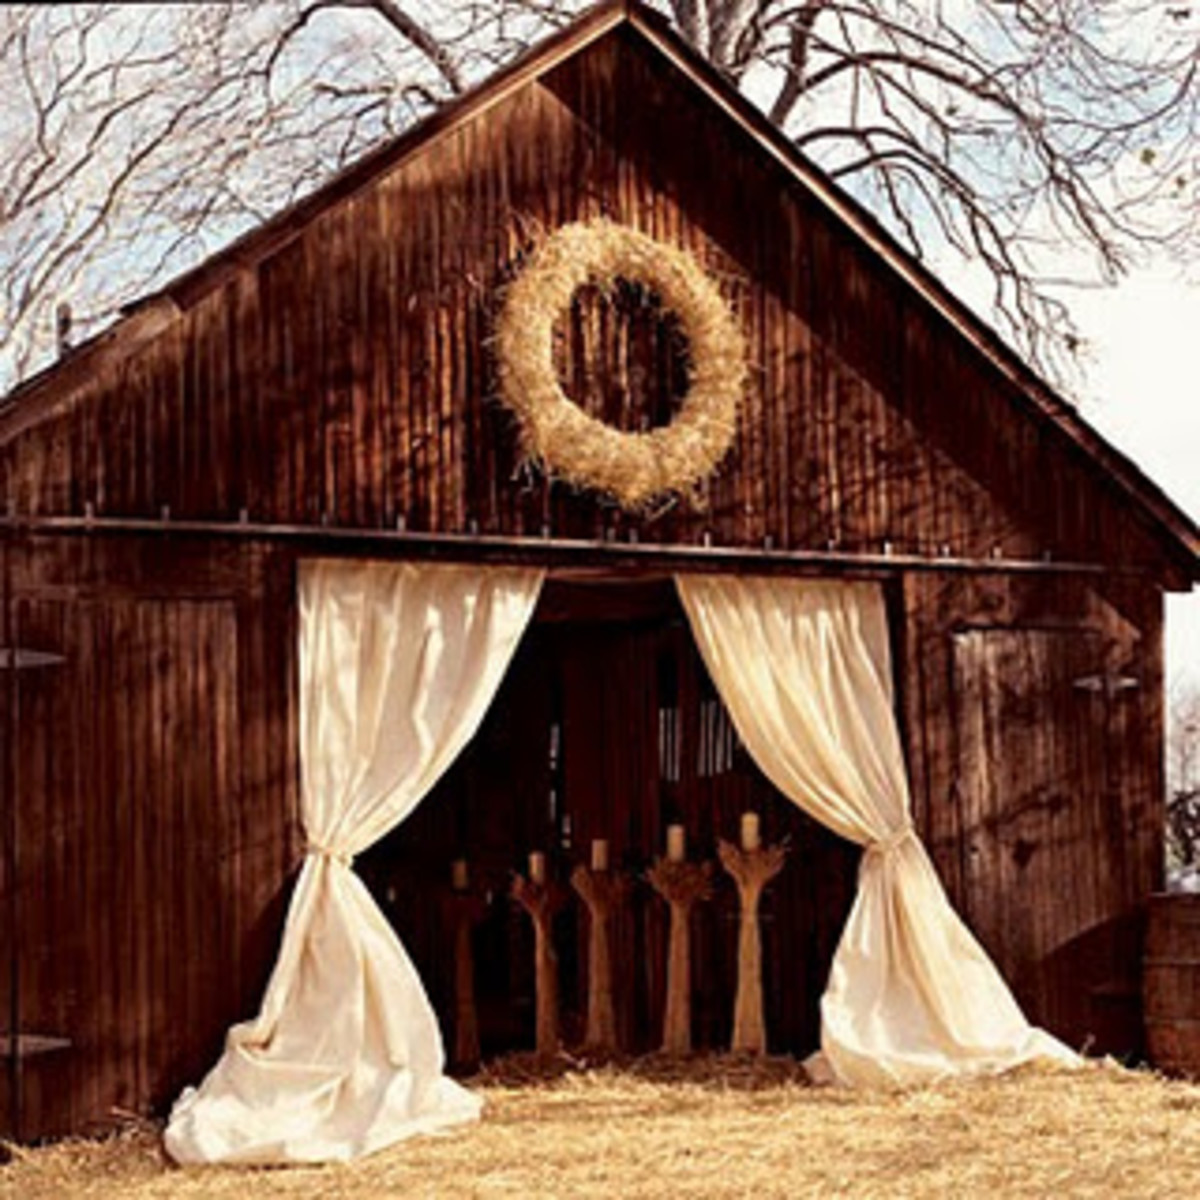 Rustic Barn Wedding Ideas for the Bride on a Budget | Holidappy